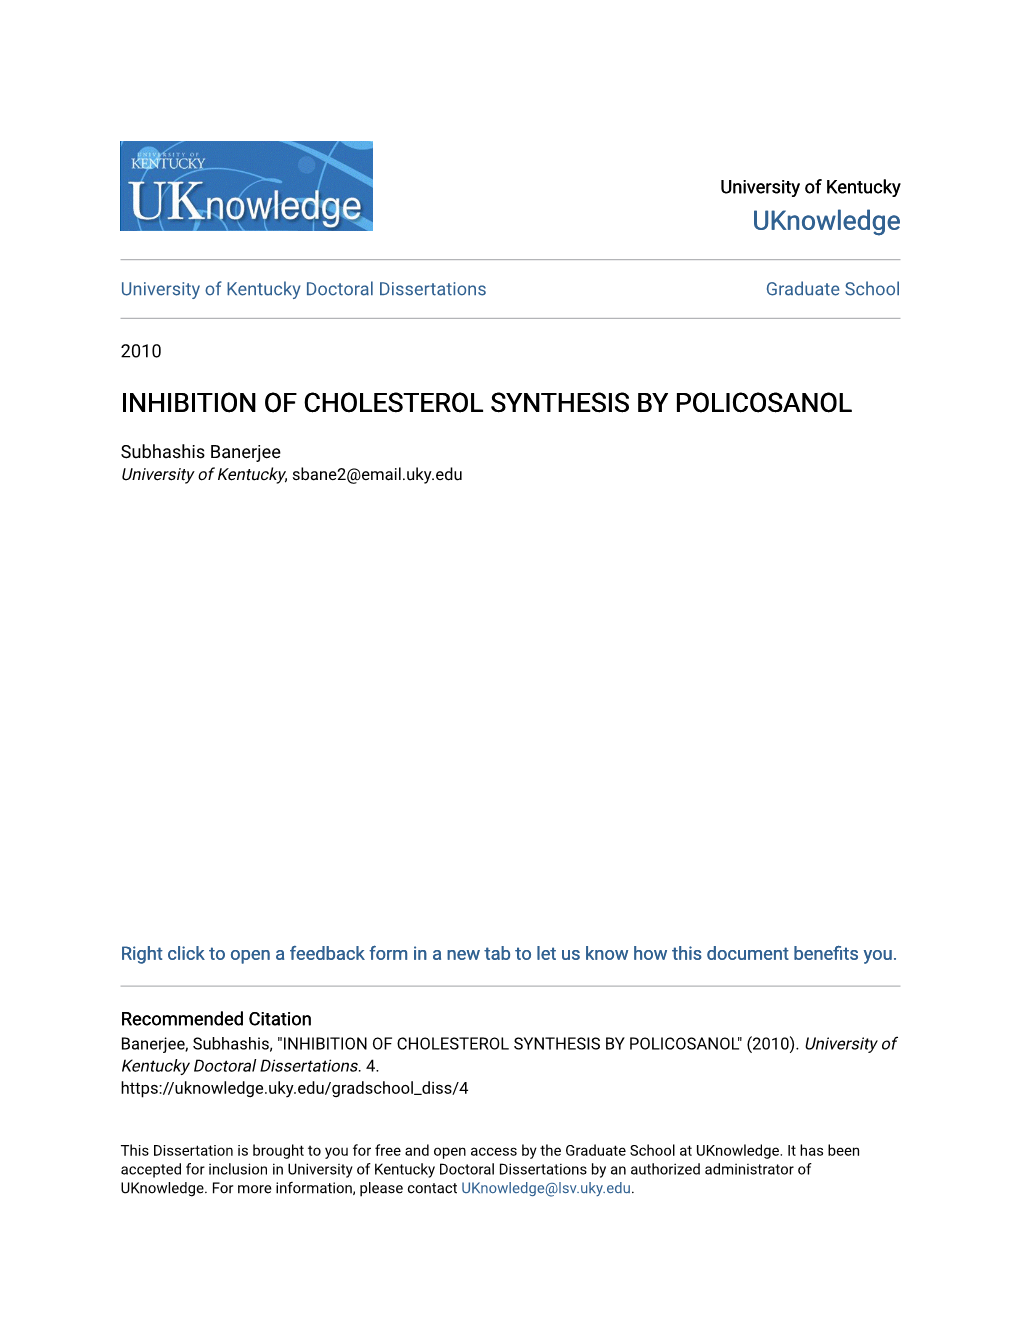 Inhibition of Cholesterol Synthesis by Policosanol